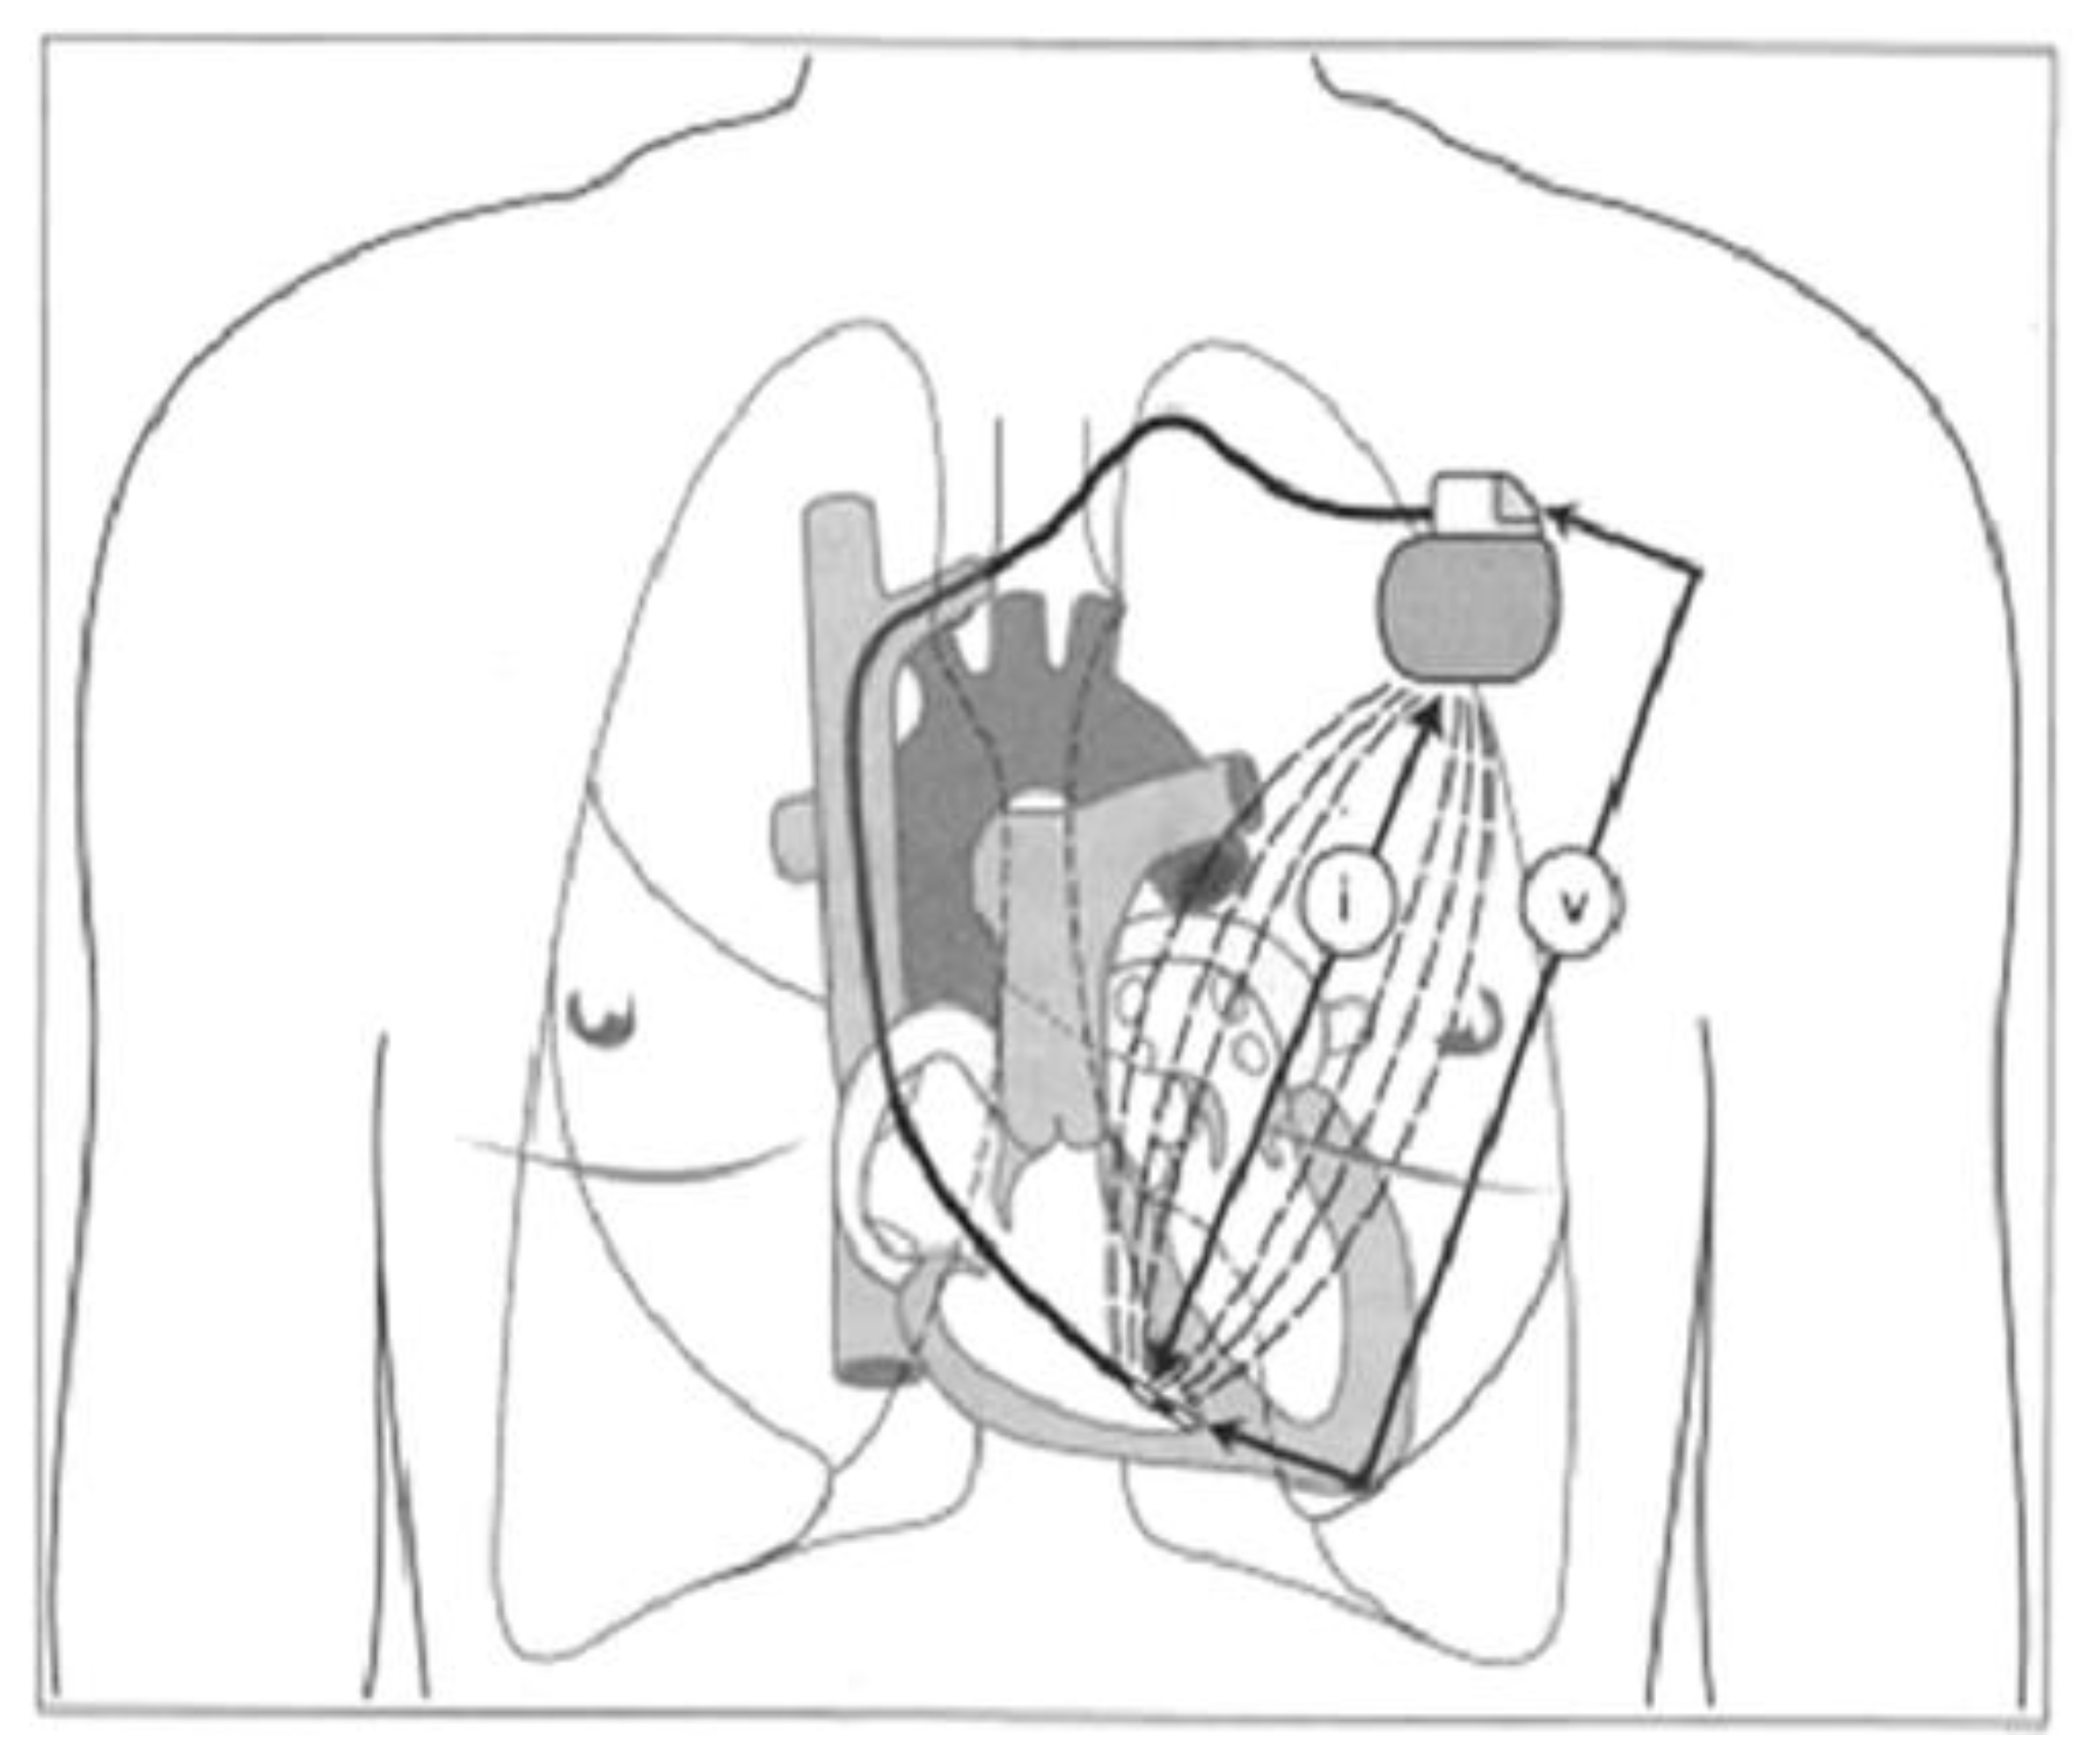 Sensors | Free Full-Text | Rate-Responsive Cardiac Pacing: Technological  Solutions and Their Applications